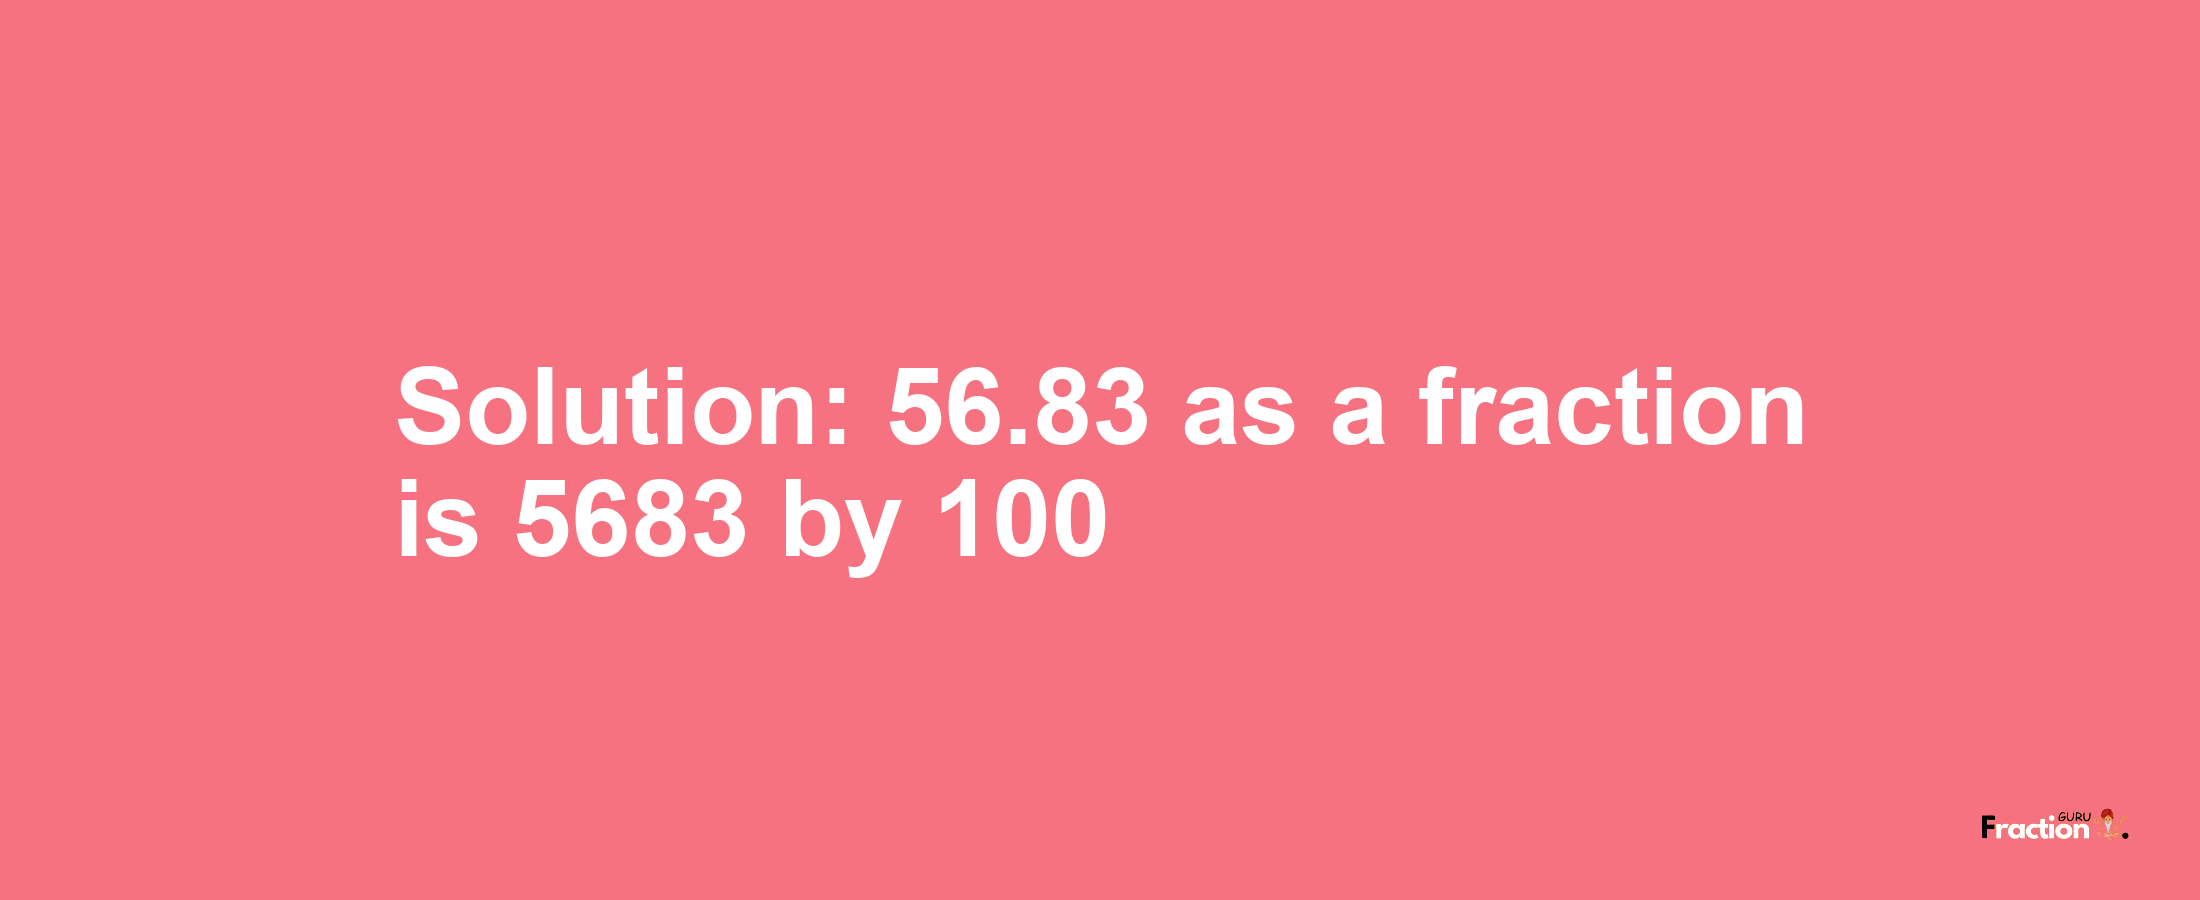 Solution:56.83 as a fraction is 5683/100